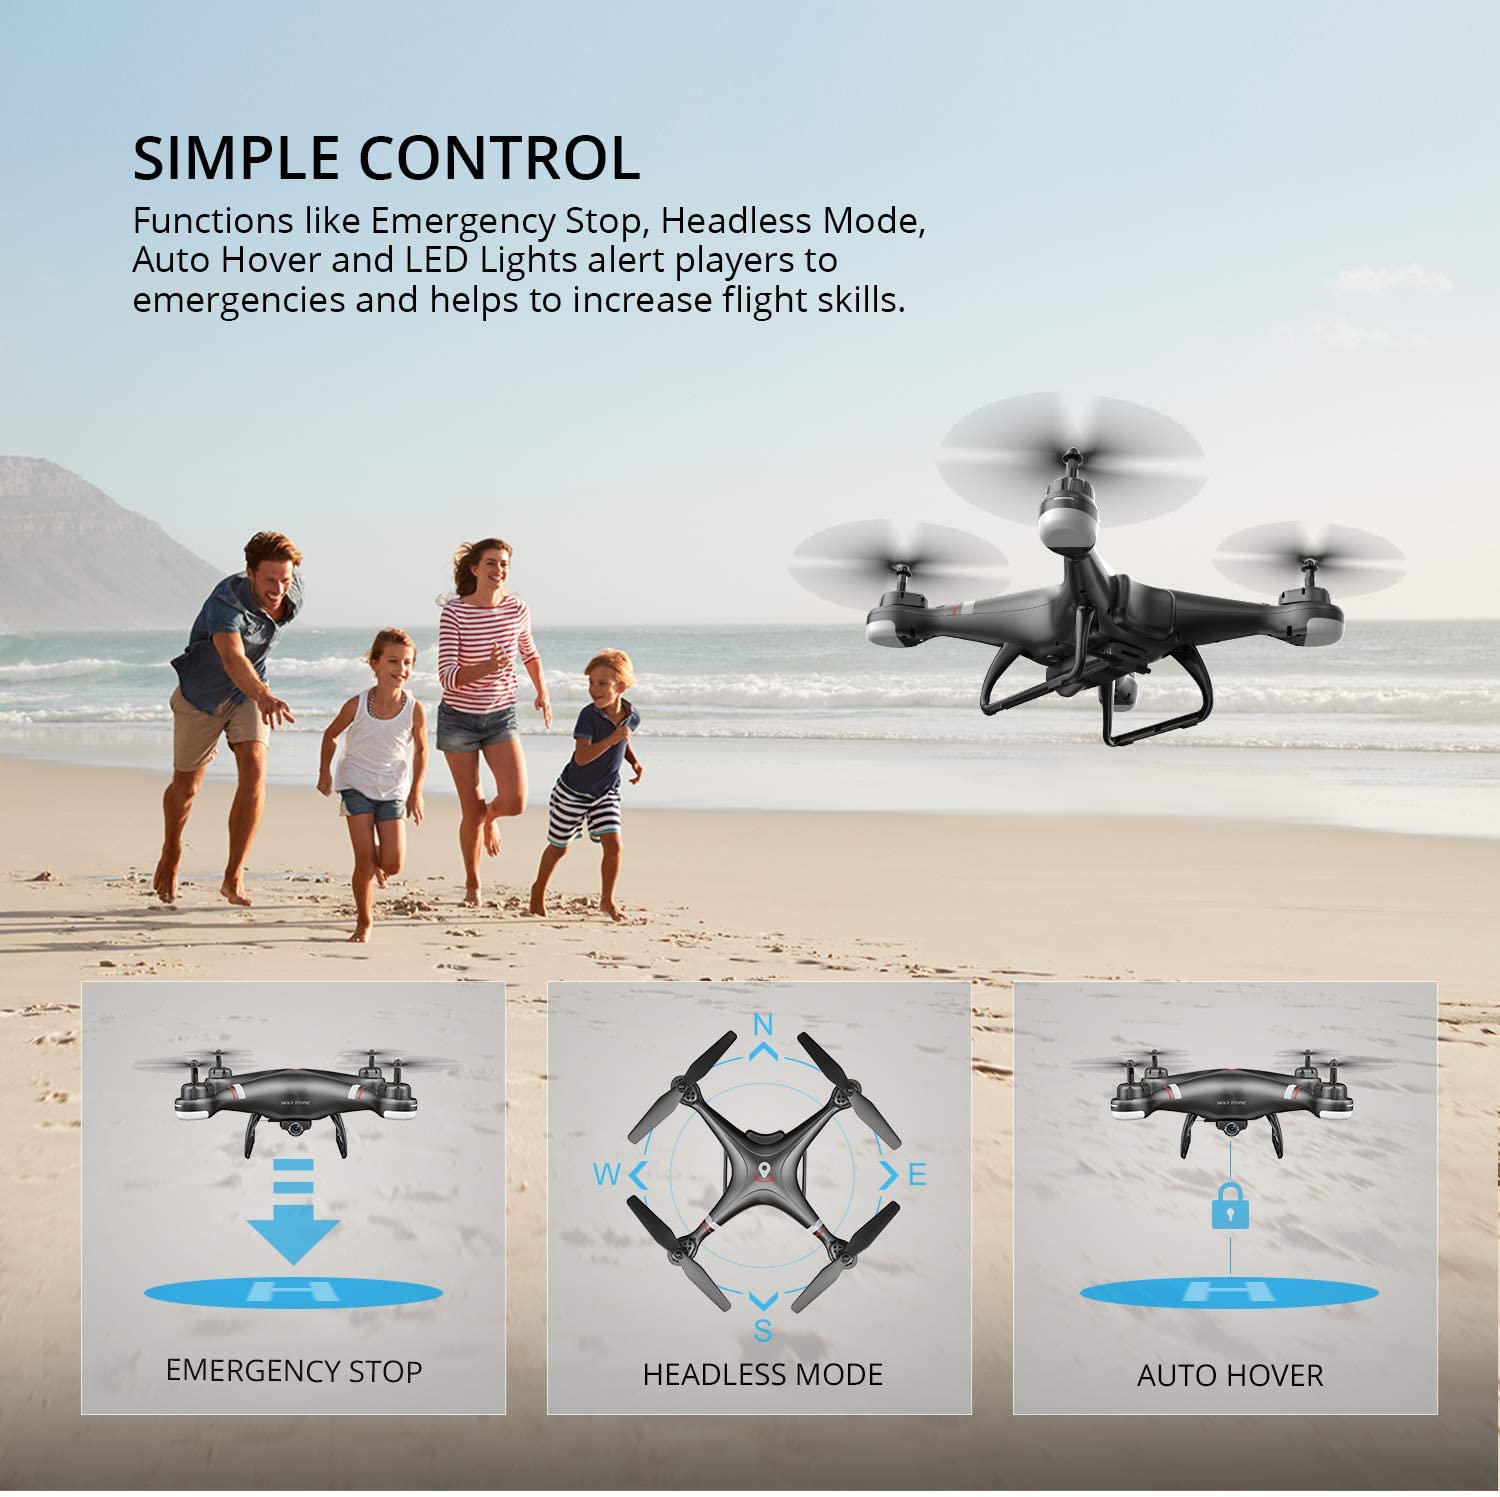 Holy Stone HS110G GPS Drone with 1080P Camera for Adults and Beginners  Follow Me Auto Return Home Batteries double the Flight Time